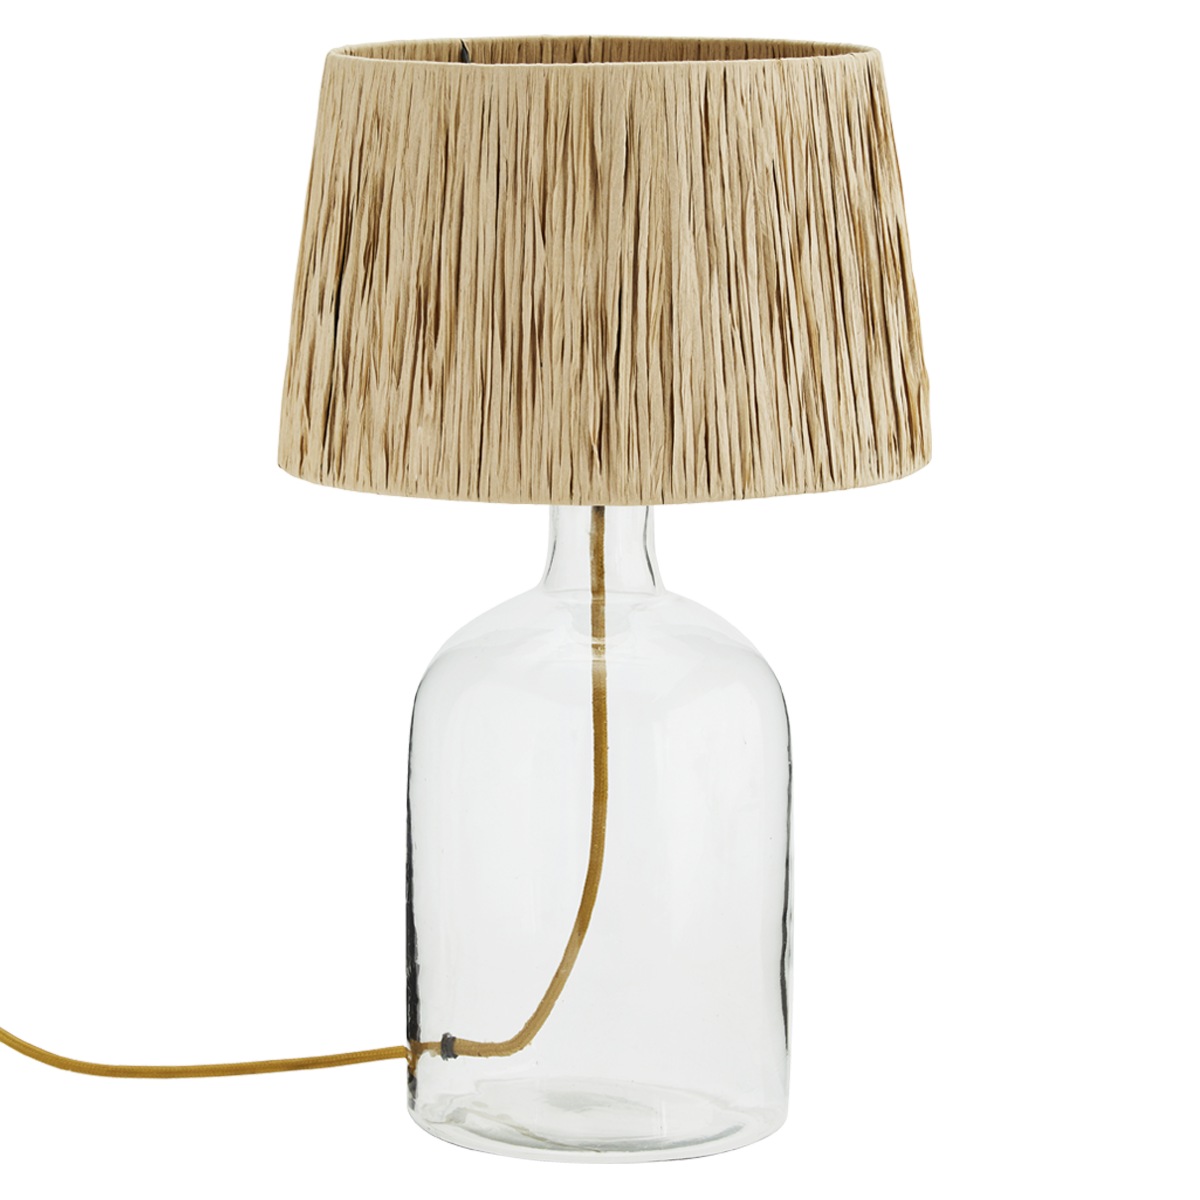 Glass table lamp with raffia shade